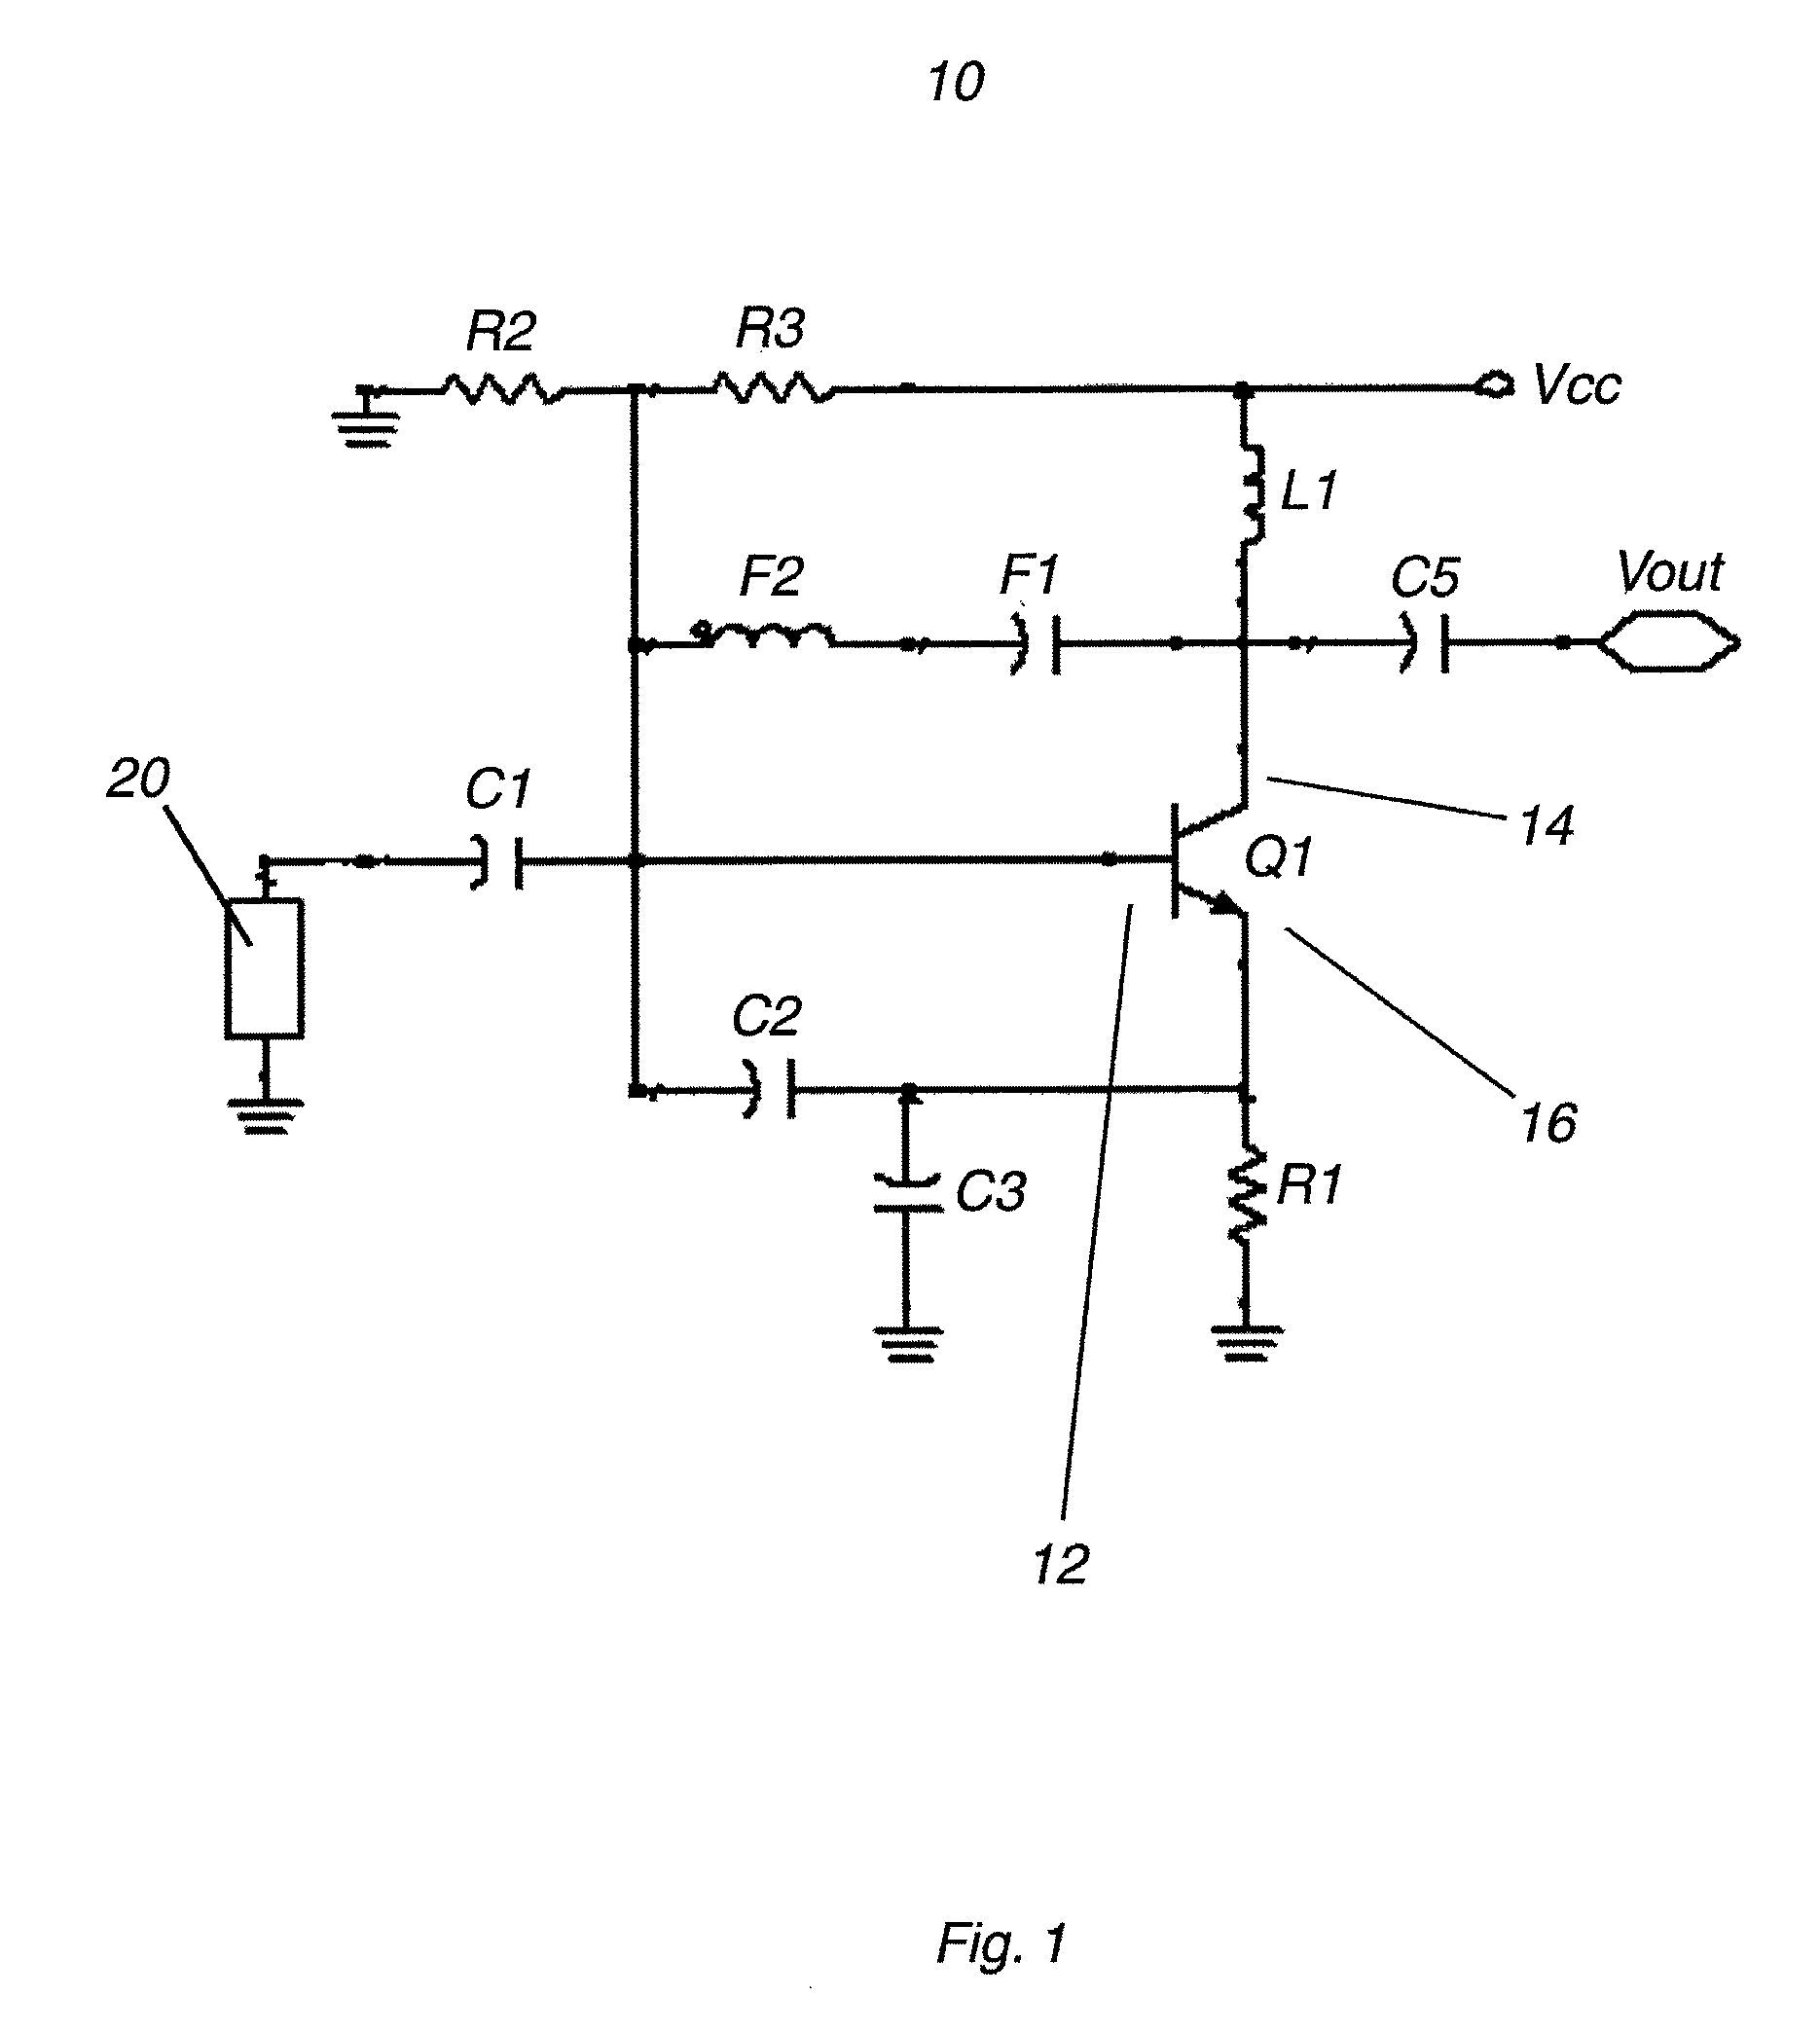 Ultra-low noise VCO